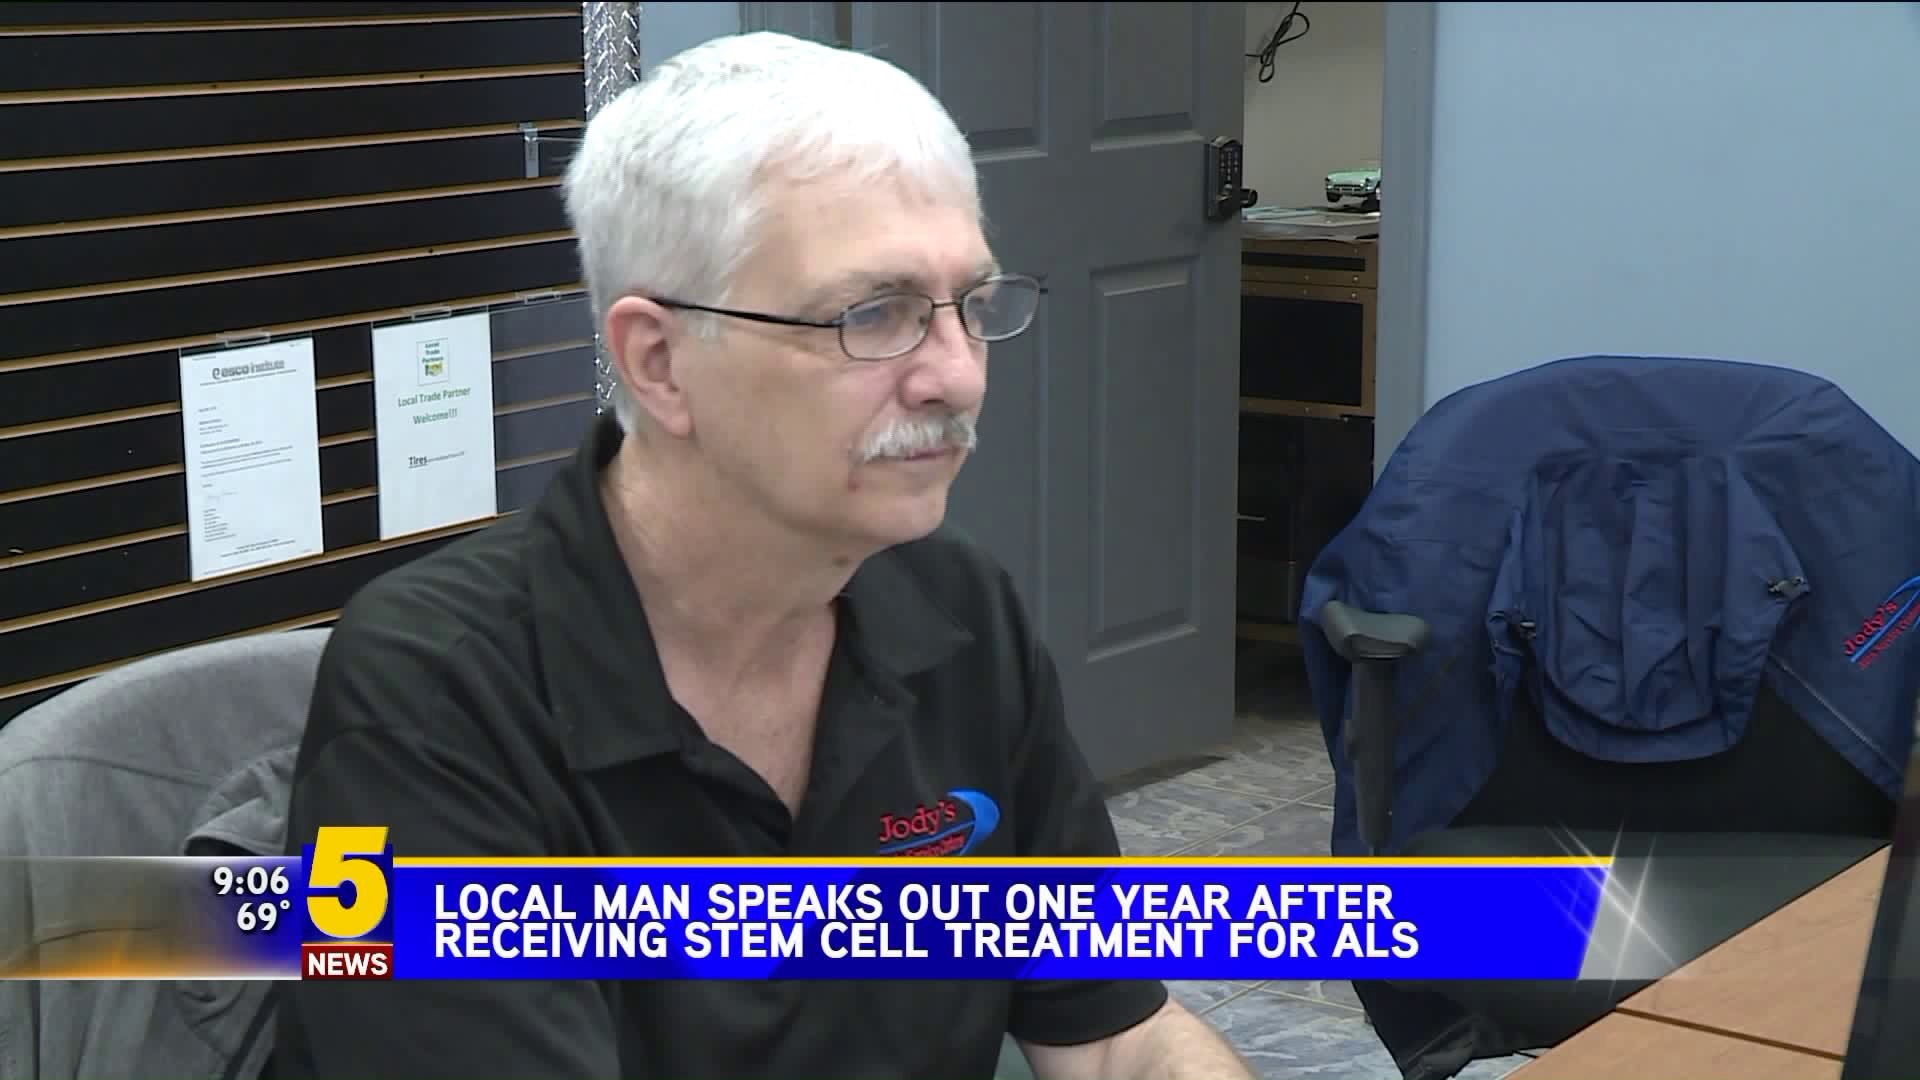 Local Man Speaks Out One Year After Receiving Stem Cell Treatment For ALS